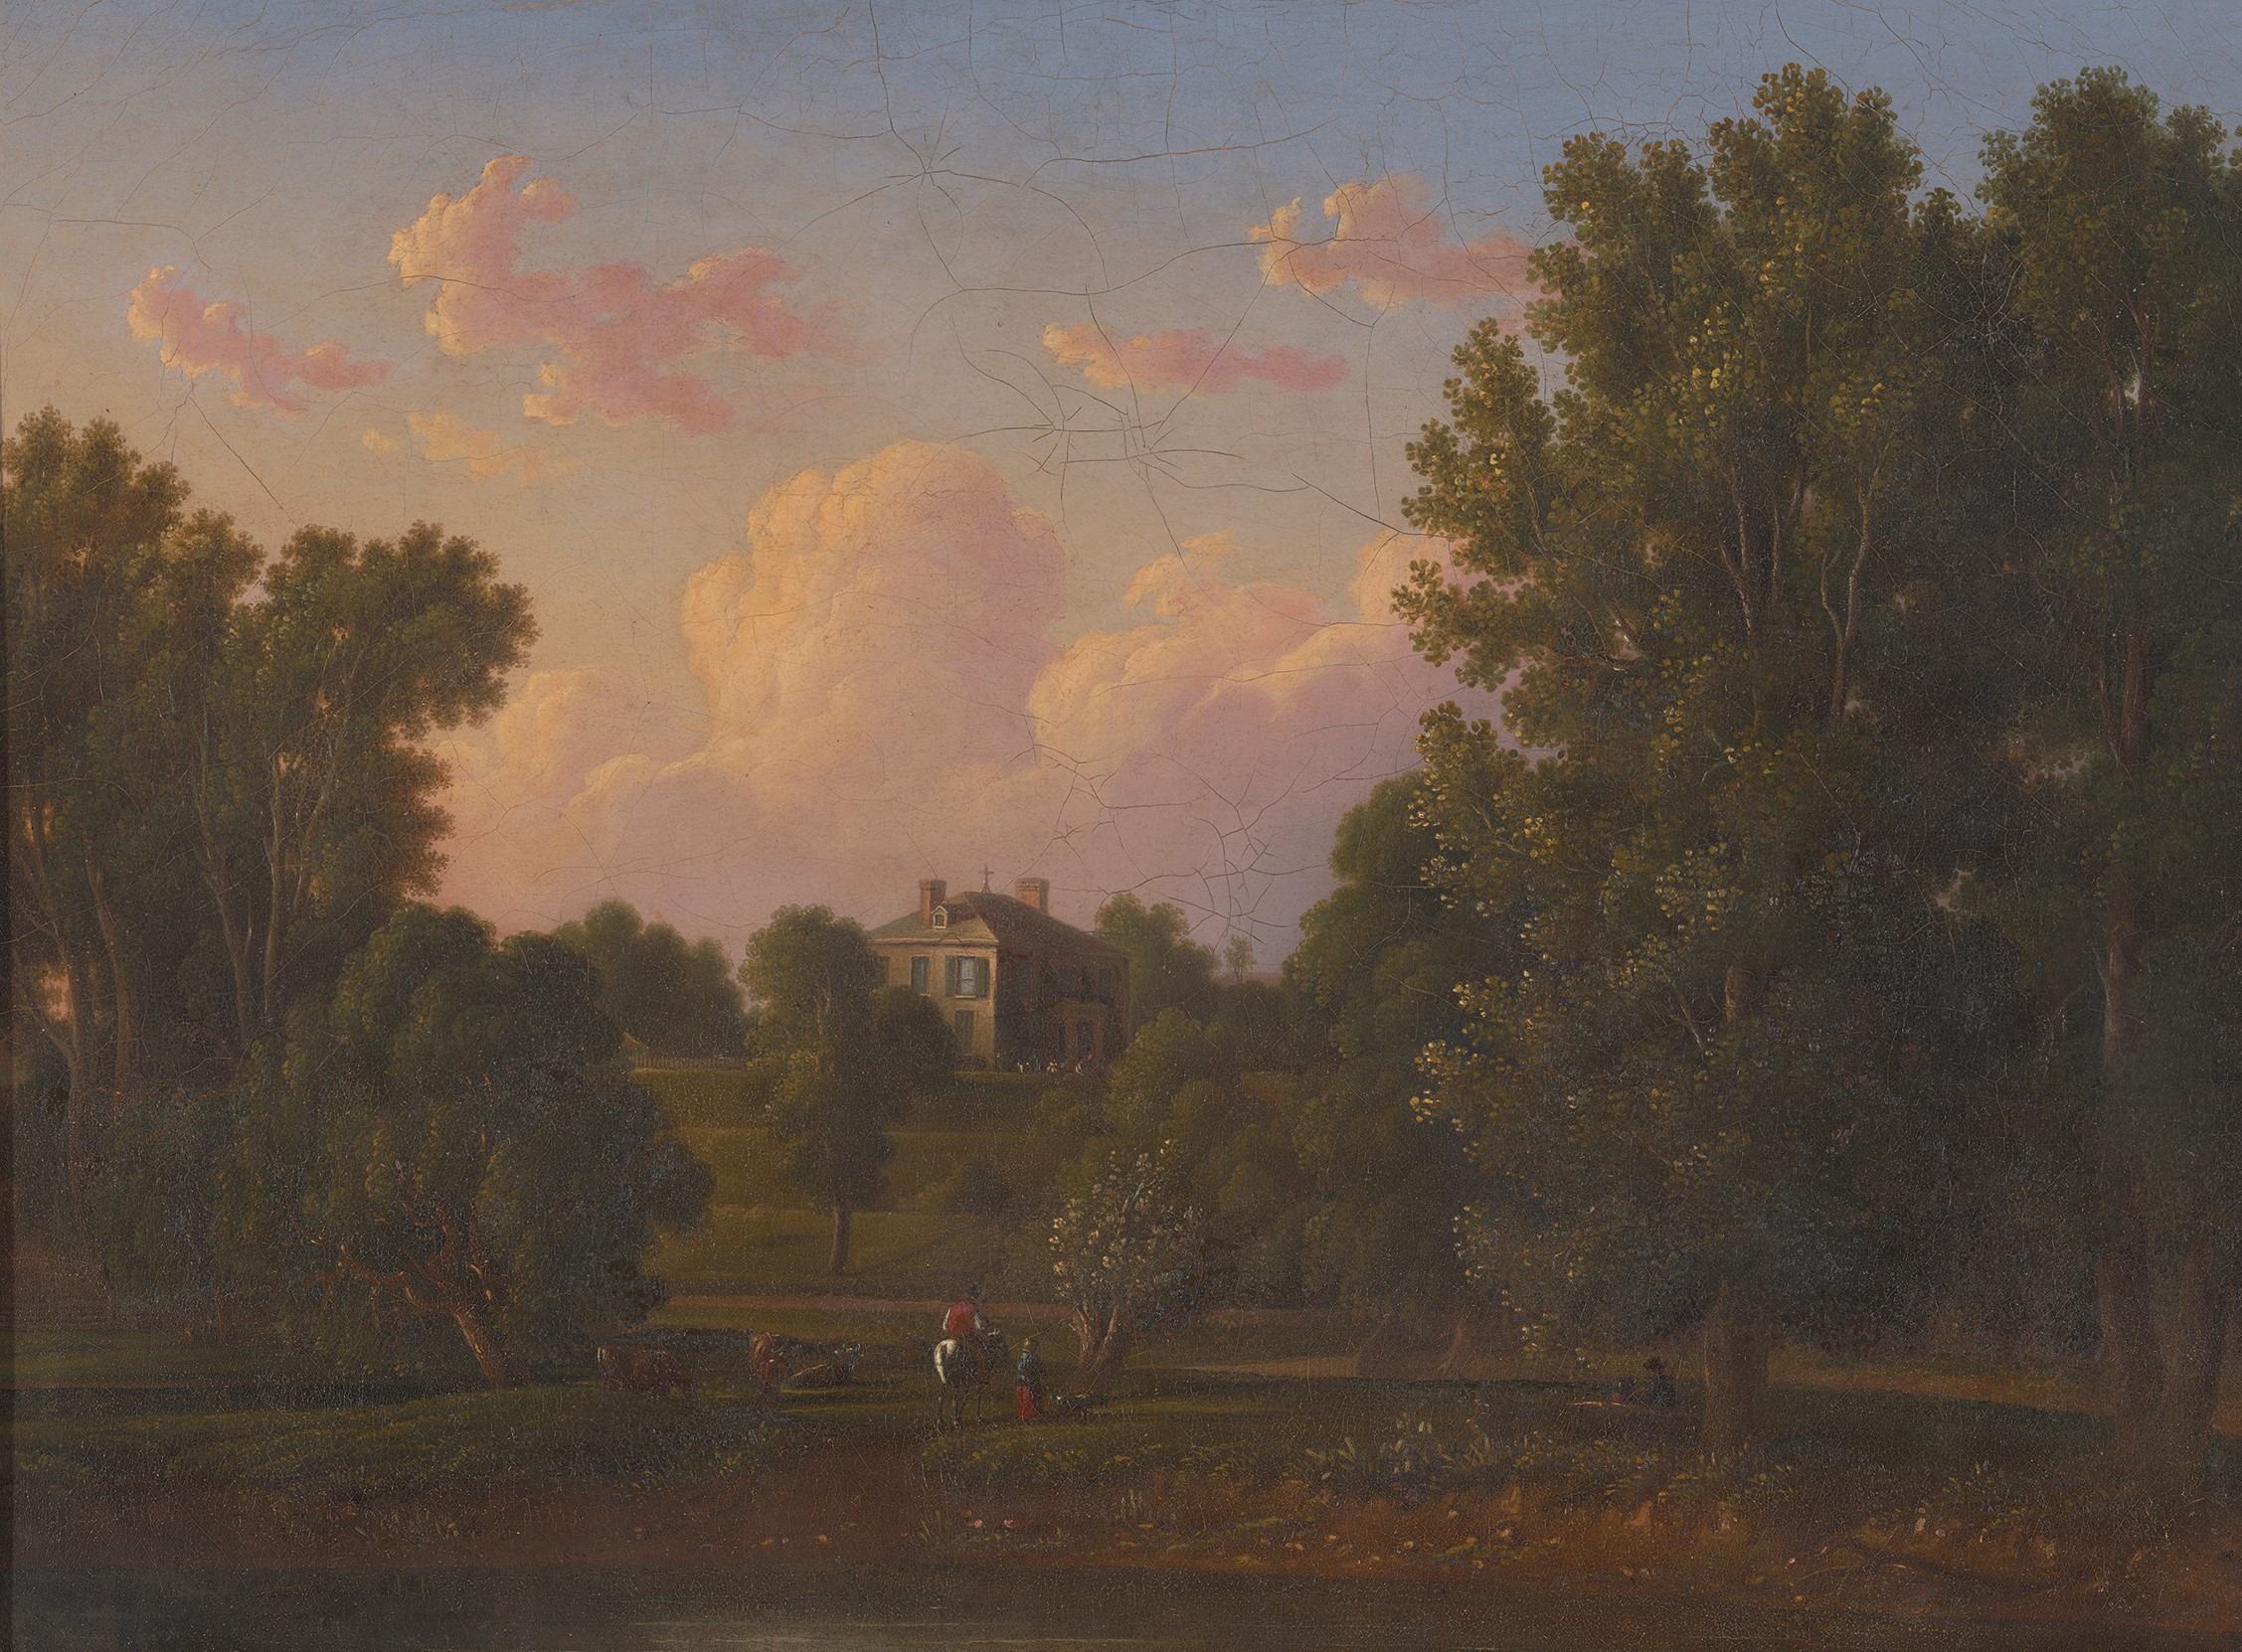 An image of a small yellow house on a hill. Hill side leads down to a river where there are two men and some cows on the banks. Surrounding the house and the hill are trees and foliage.